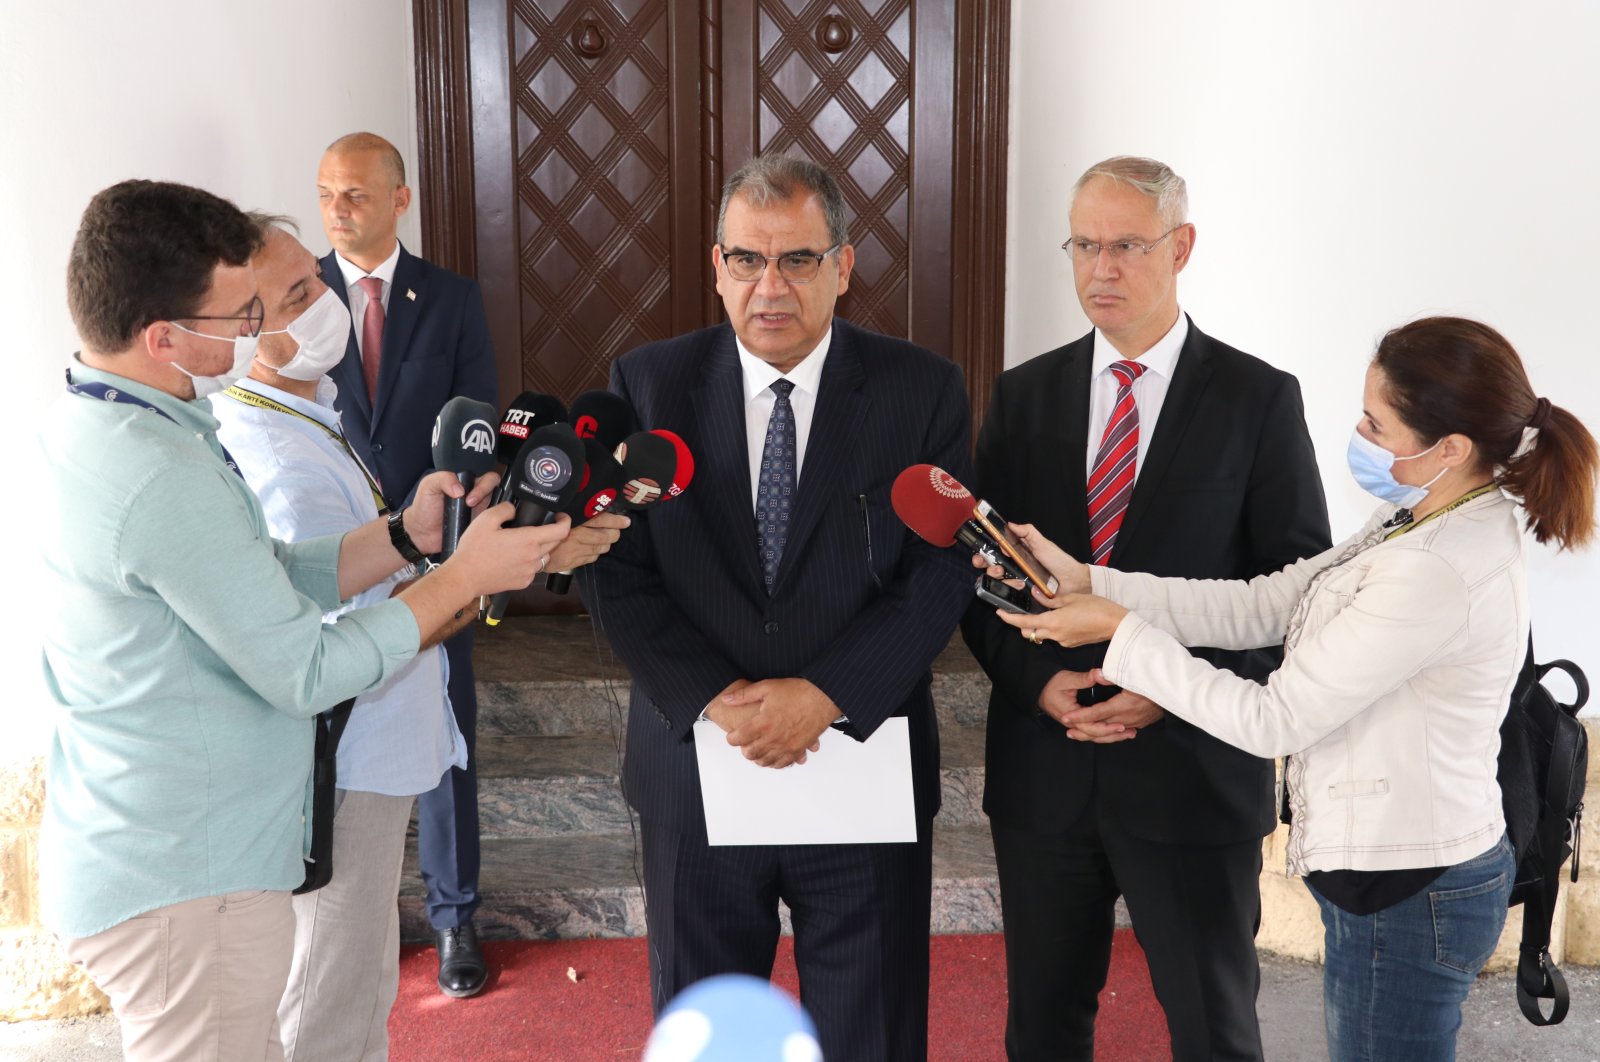 Faiz Sucuoğlu, head of the National Unity Party (UBP), has formed a new government in the Turkish Republic of Northern Cyprus (TRNC), Nov. 1, 2021. (AA Photo)